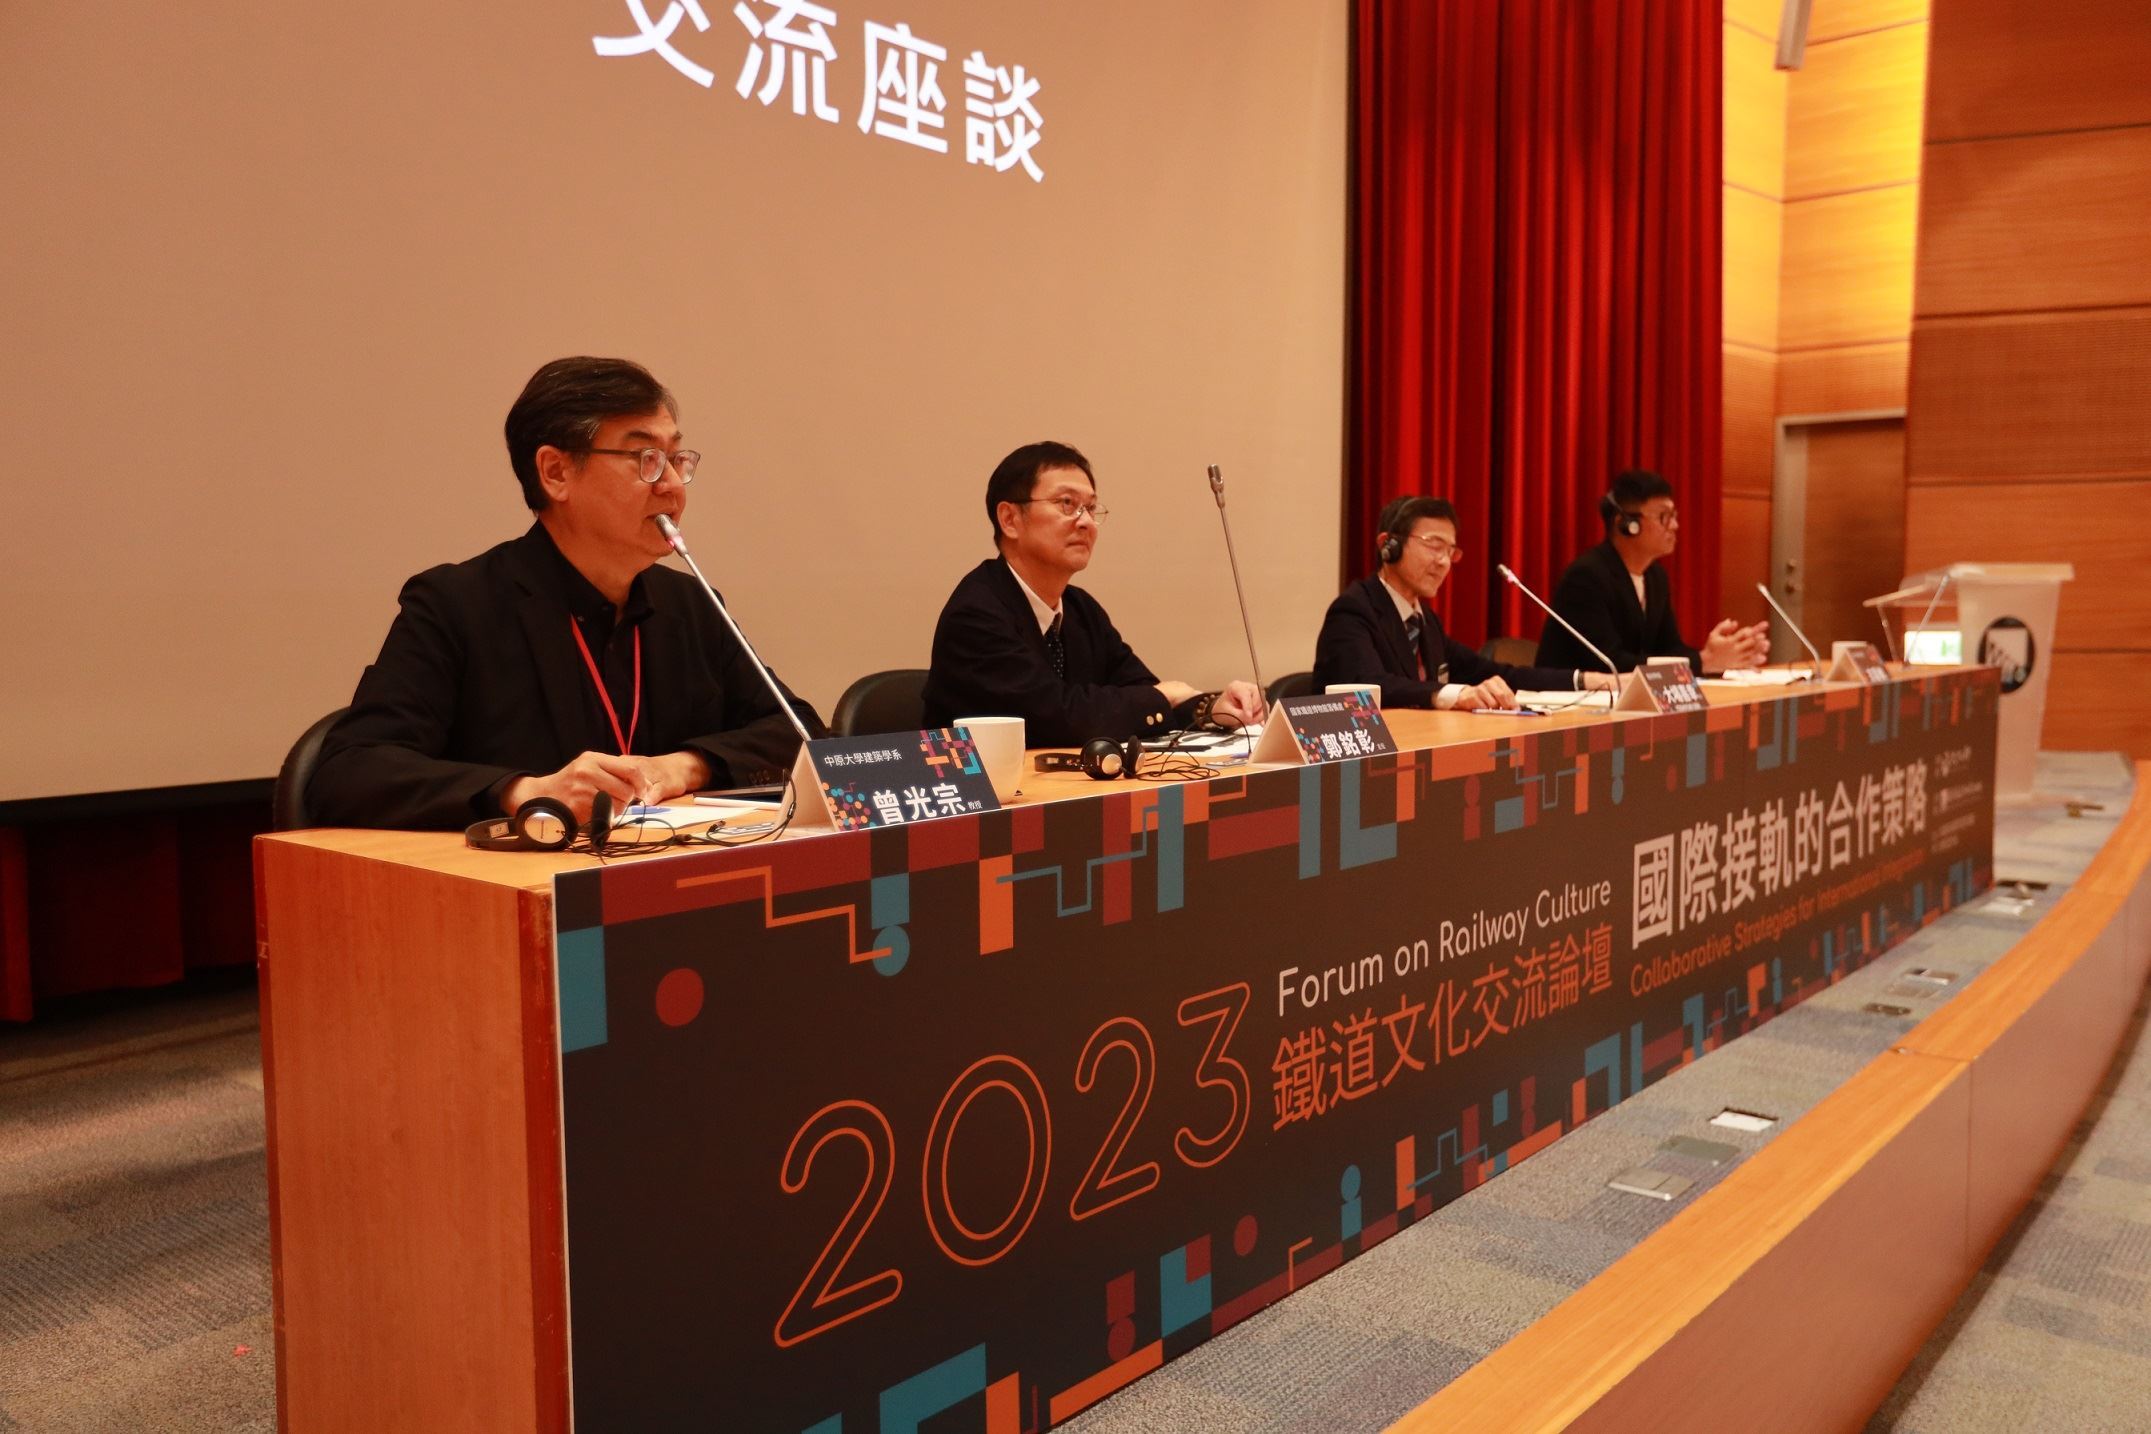 2023 Forum on Railway Culture takes place in Taiwan.